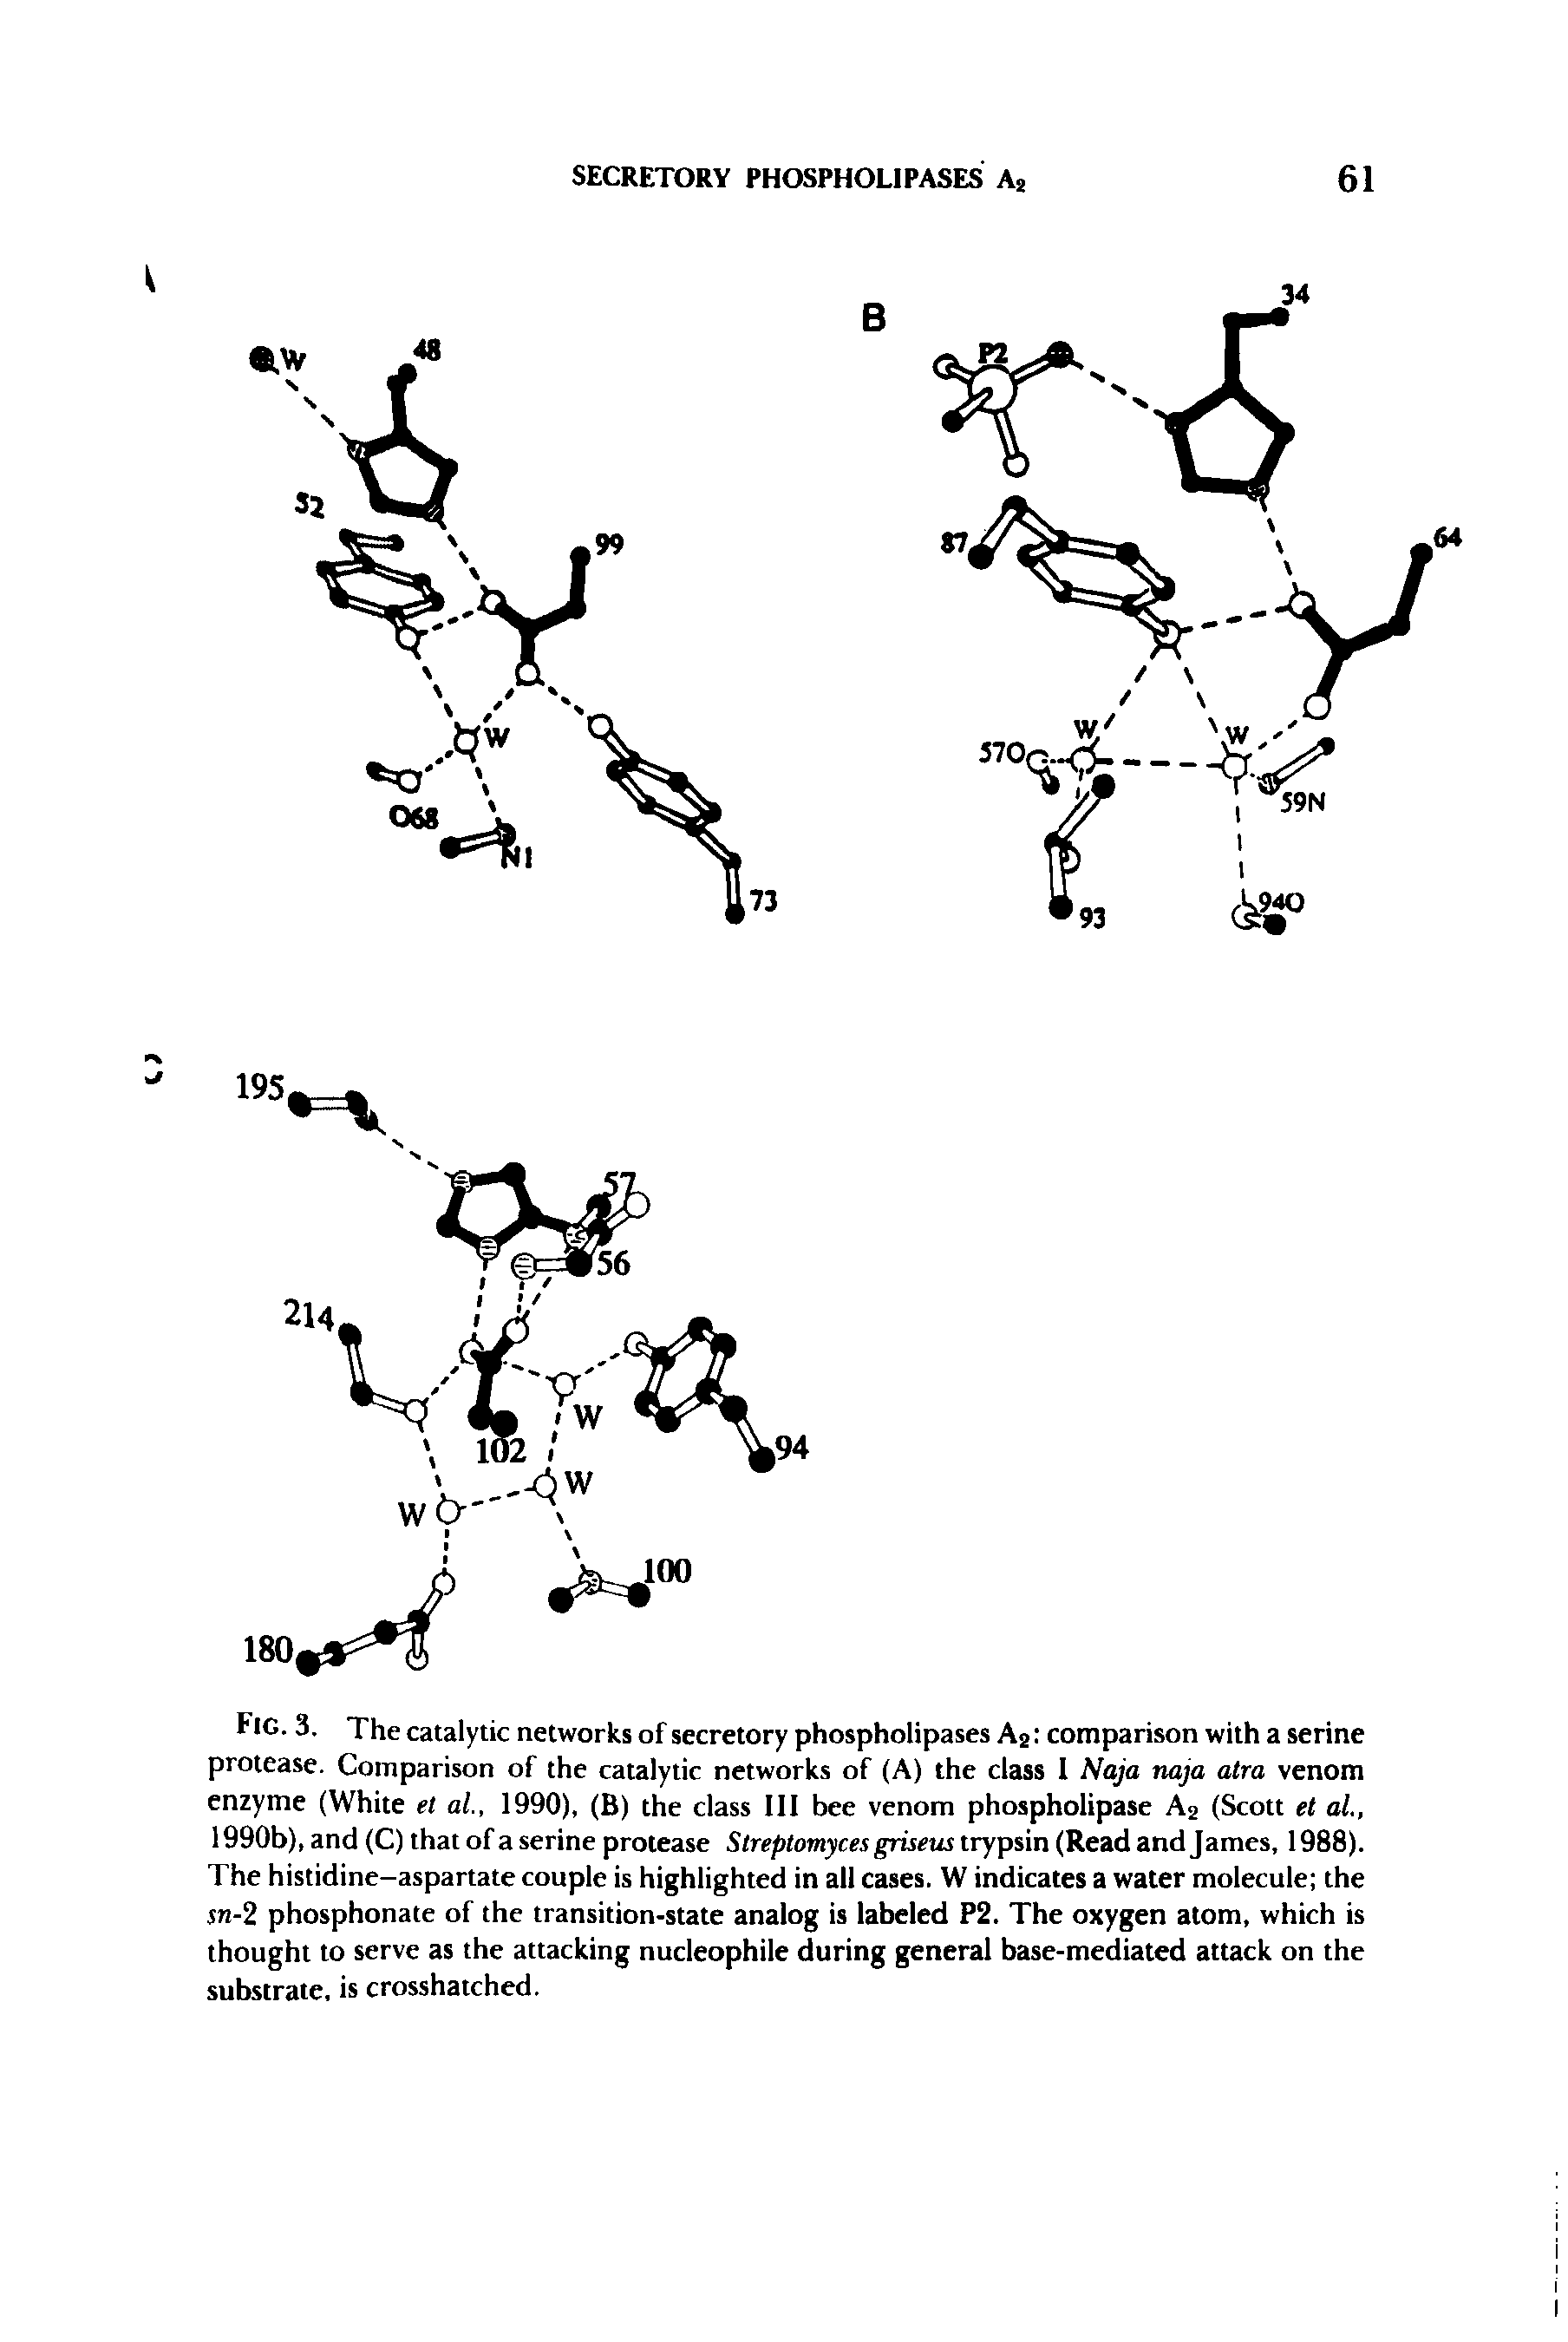 Fig. 3. The catalytic networks of secretory phospholipases A2 comparison with a serine protease. Comparison of the catalytic networks of (A) the class I Naja naja atra venom enzyme (White et al, 1990), (B) the class III bee venom phospholipase As (Scott et at, 1990b), and (C) that of a serine protease Slreptomyces griseus trypsin (Read and James, 1988). The histidine-aspartate couple is highlighted in all cases. W indicates a water molecule the sn-2 phosphonate of the transition-state analog is labeled P2. The oxygen atom, which is thought to serve as the attacking nucleophile during general base-mediated attack on the substrate, is crosshatched.